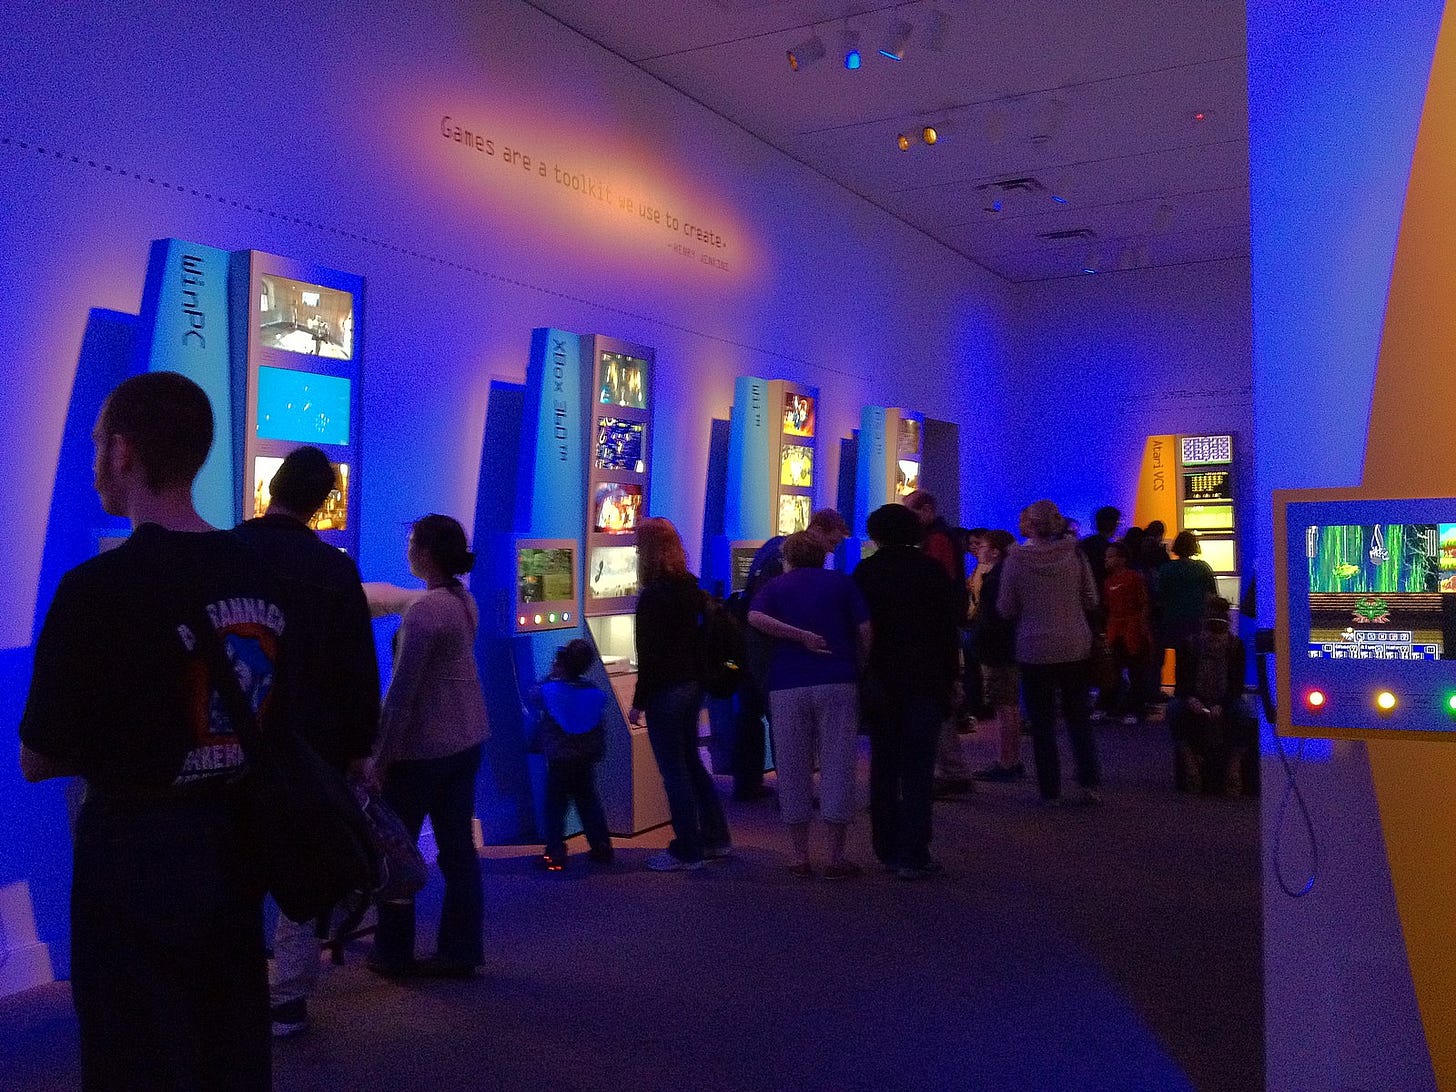 The opening weekend of “The Art of Video Games" exhibit at the Smithsonian American Art Museum in March 2012. Mainly blue and some orange lights bathe visitors looking at screens. A quote above exhibits reads “Games are a toolkit we use to create,” but the attribution is hard to decipher.